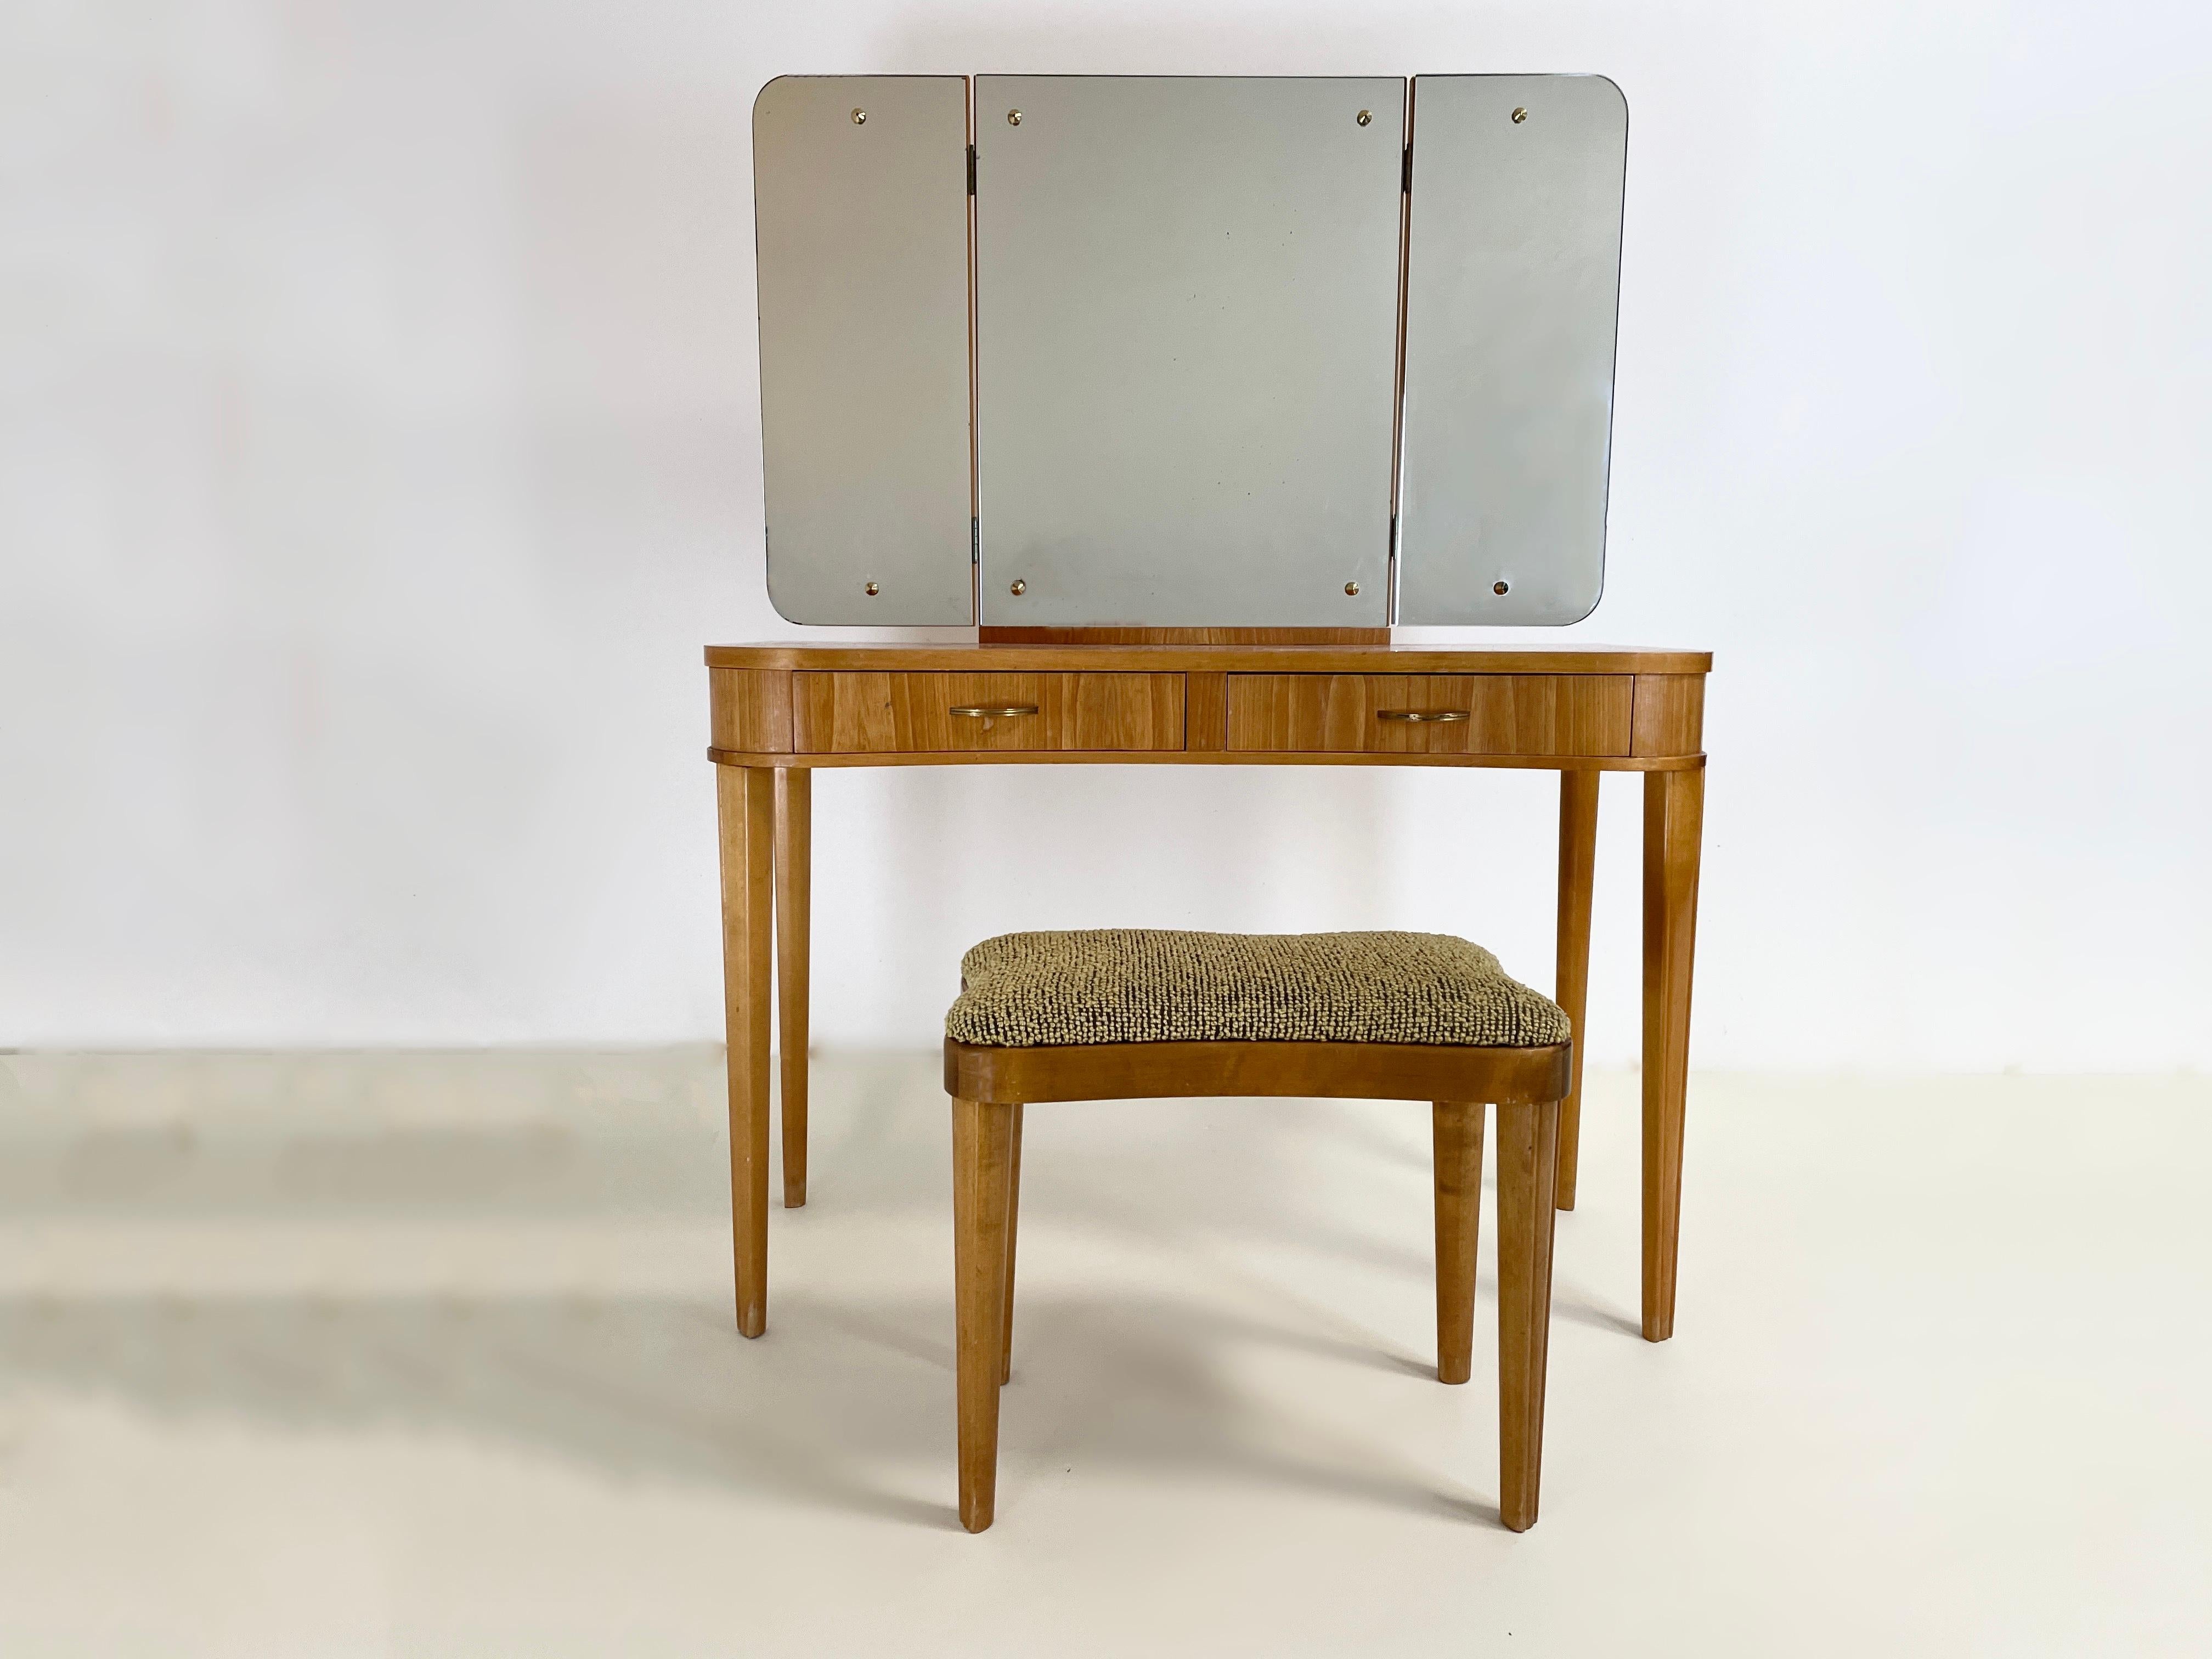 Discover the elegance of history with the Dressing Table and Stool attributed to Margaret Travers Nordman and produced by Keravan Puusepäntehdas Oy/Stockmann. The organic lines of the dressing table's surface, combined with the elegant design of the